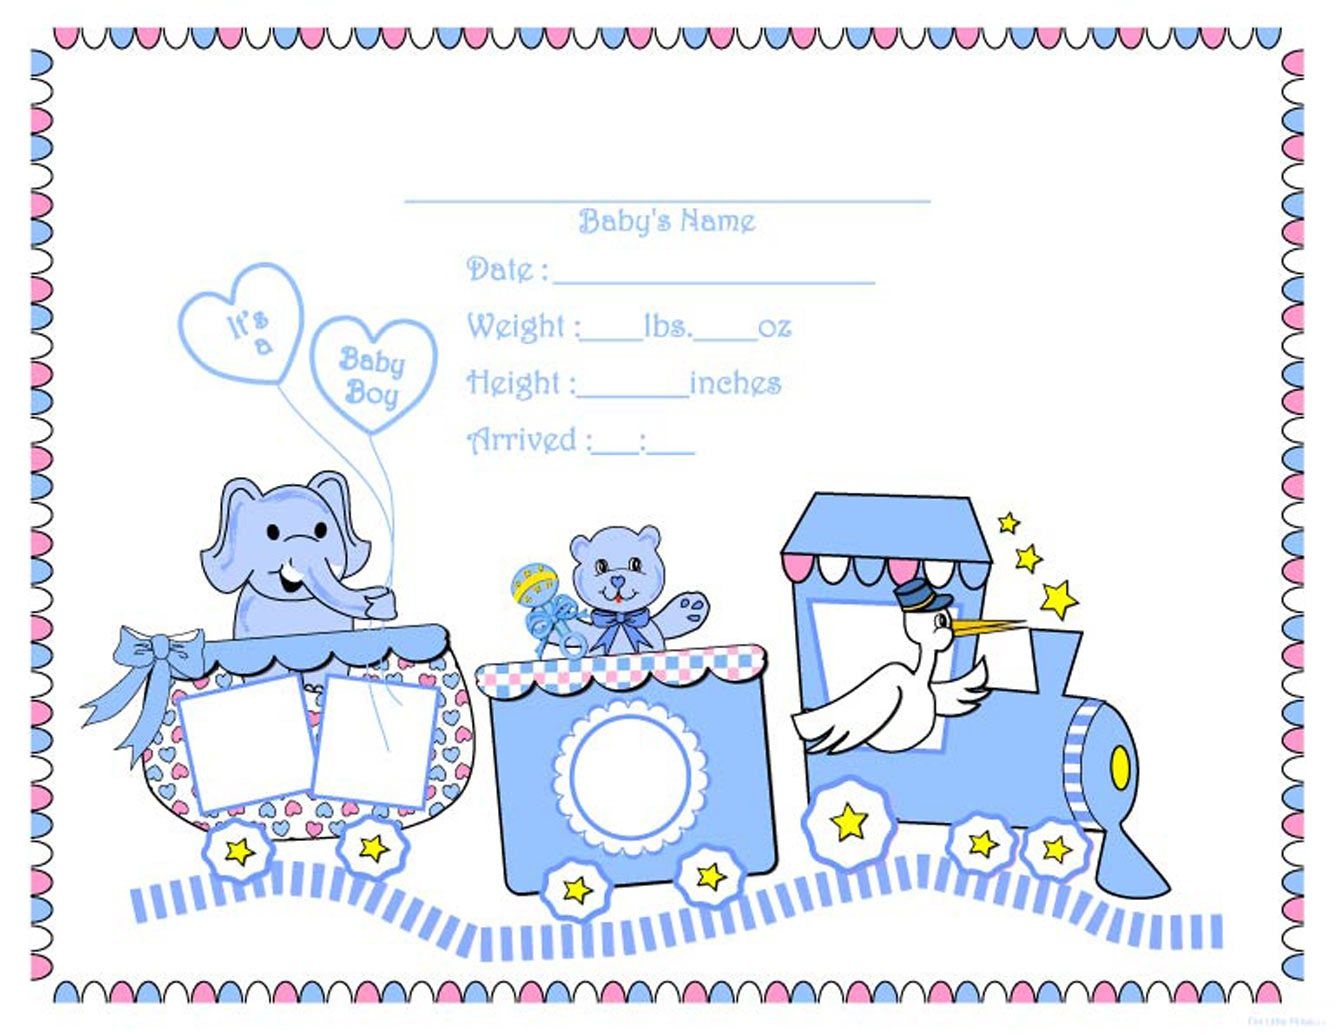 free-printable-digital-scrapbook-template-pages-new-born-baby